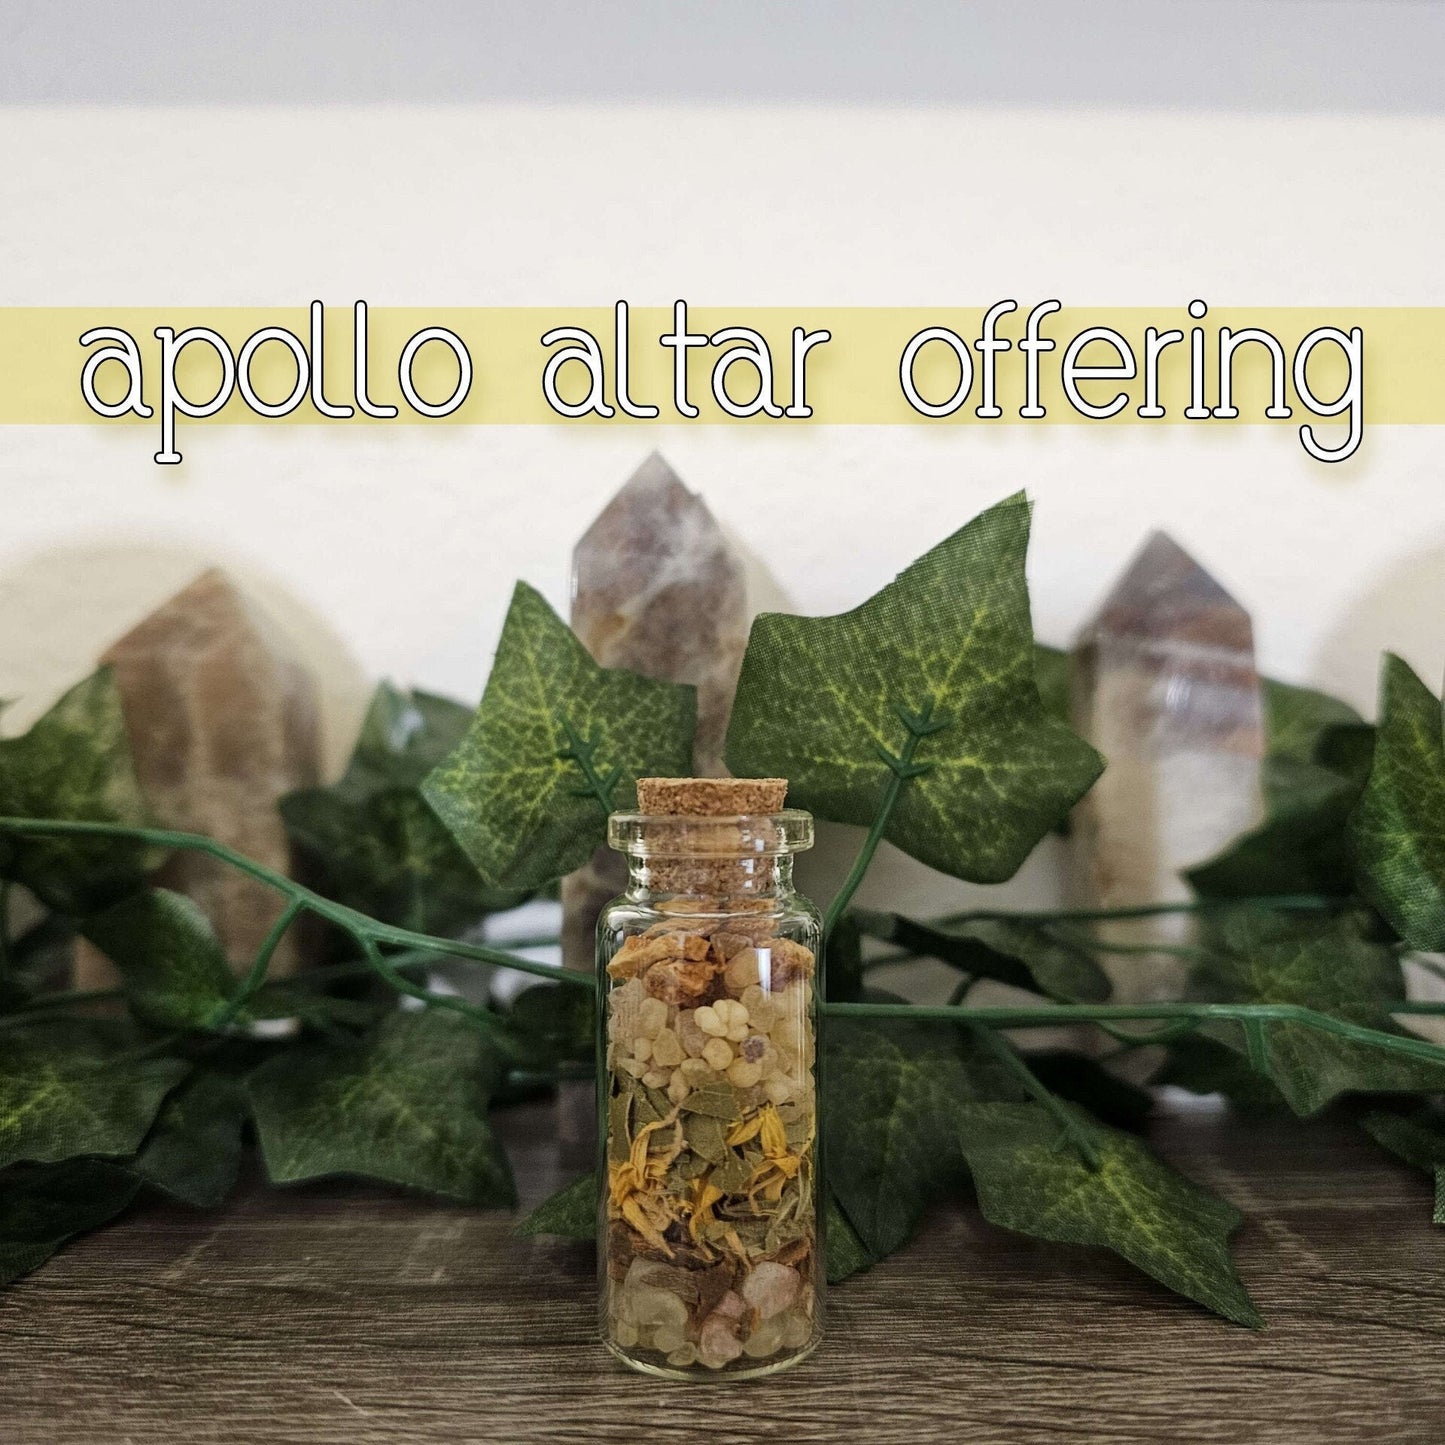 APOLLO Altar Offering - offerings for the Gods - God of Archery, Healing, Sun and Light, Inspiration, Prophecy - Shrine & Altar Tools